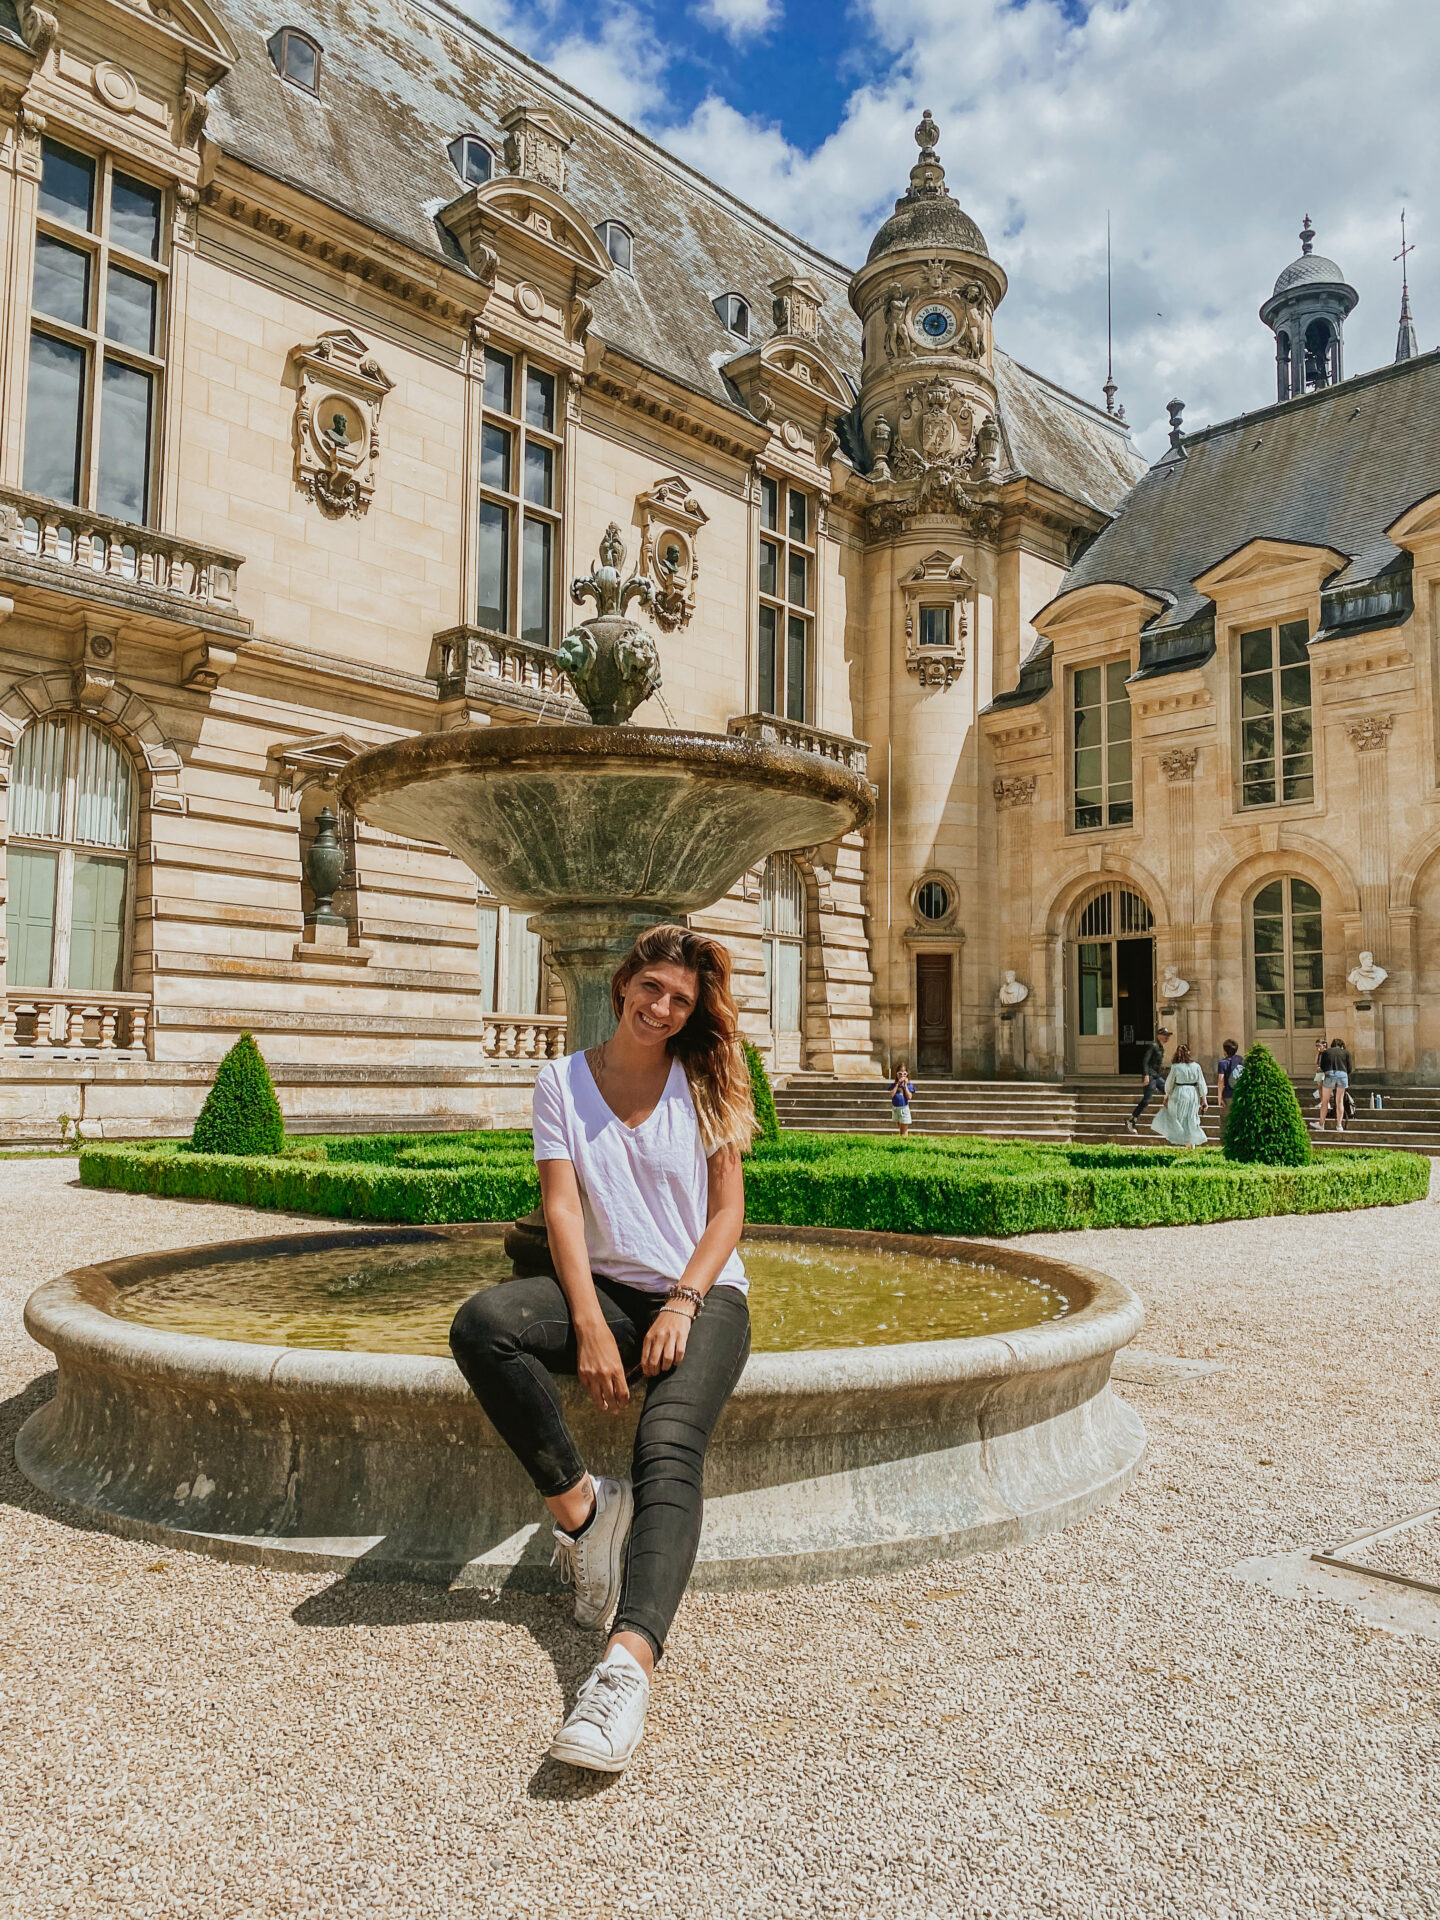 Guide to the Chateau de Chantilly - The Good Life France